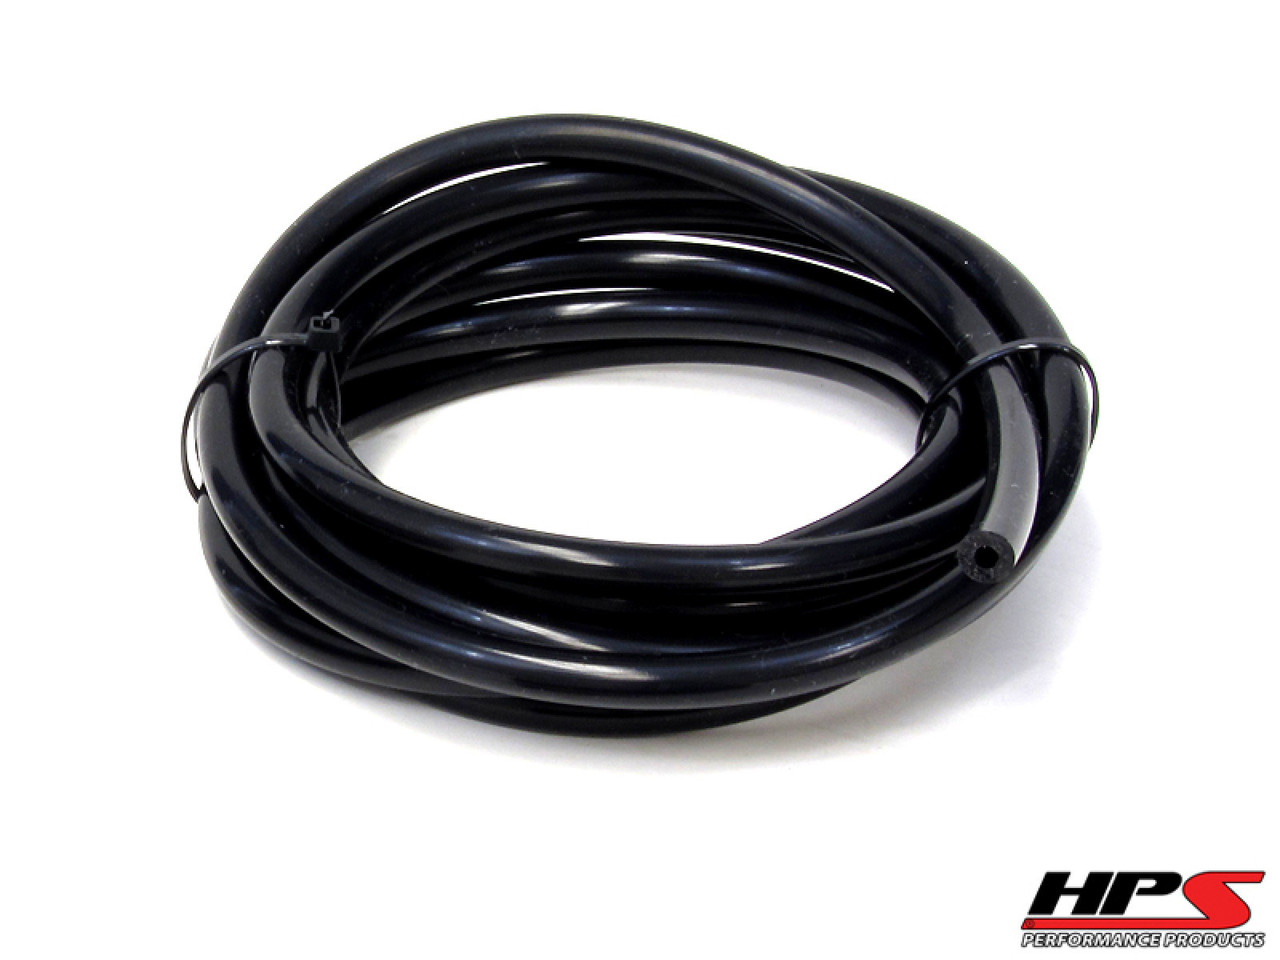 HPS 1/8" (3mm) ID Black High Temp Silicone Vacuum Hose w/ 1.5mm Wall Thickness - 25 Feet Pack (HPS-HTSVH3TW-BLKx25)